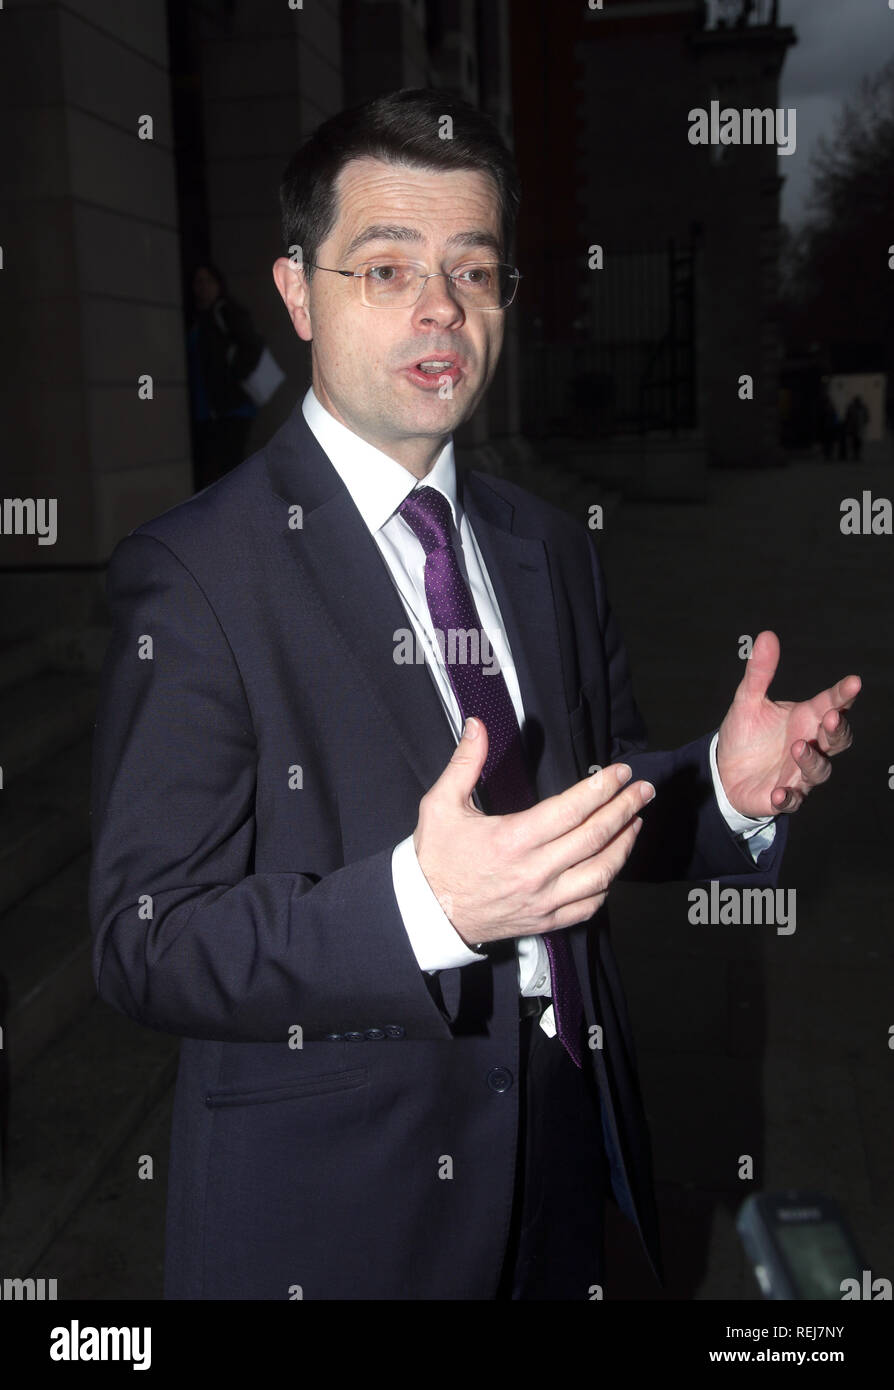 Local MP James Brokenshire waiting for the family of Charlotte Brown, who died following a speedboat crash on the River Thames, to arrive at Portcullis House, London, to meet the Home Secretary Sajid Javid. Stock Photo